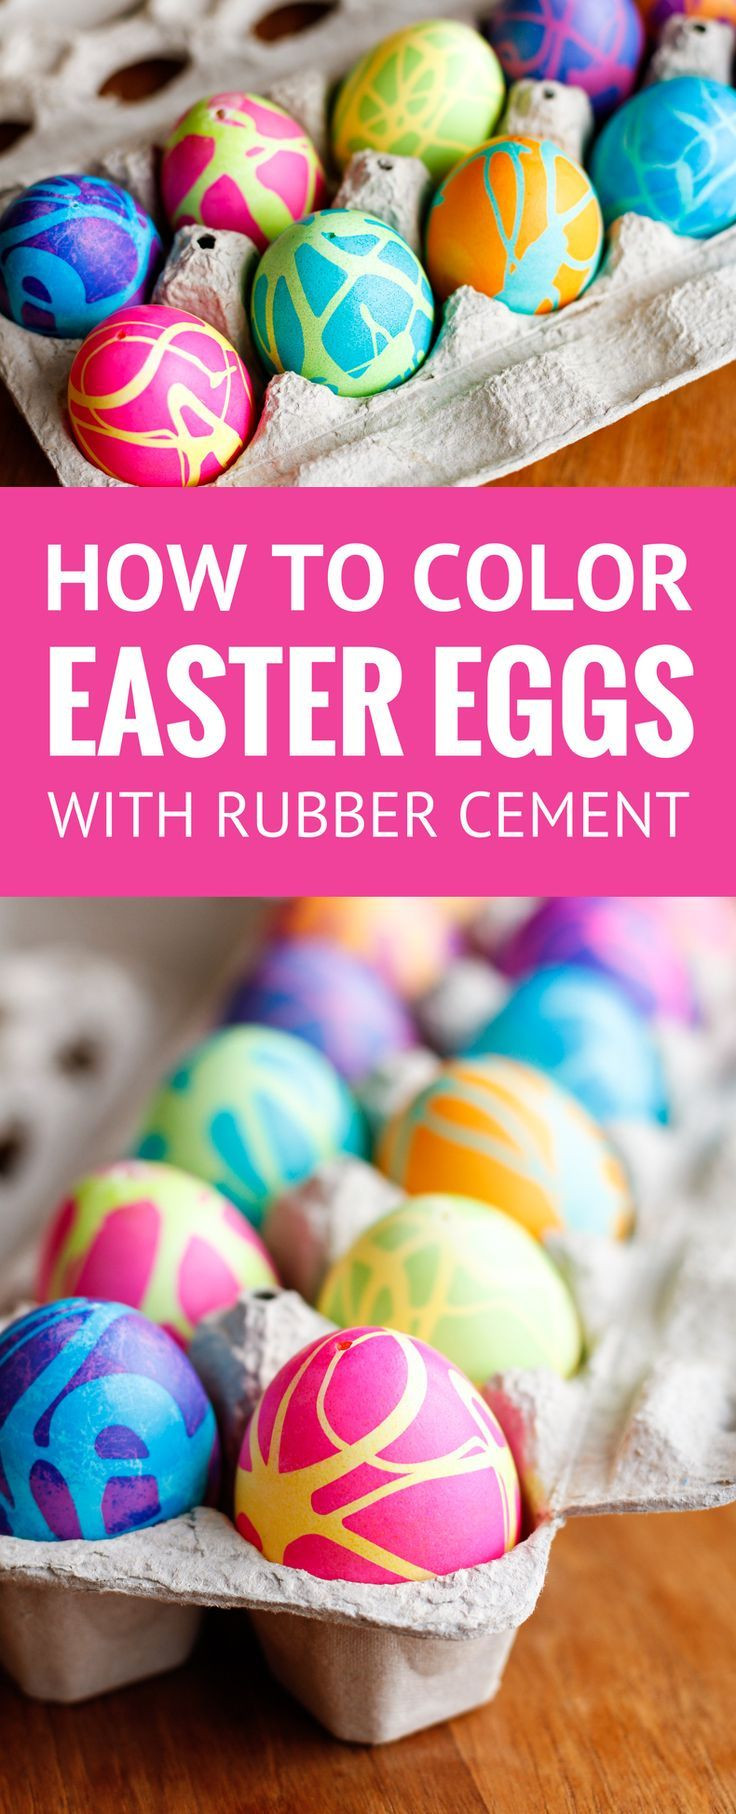 Easter Eggs With Food Coloring
 Pin on Getting Crafty